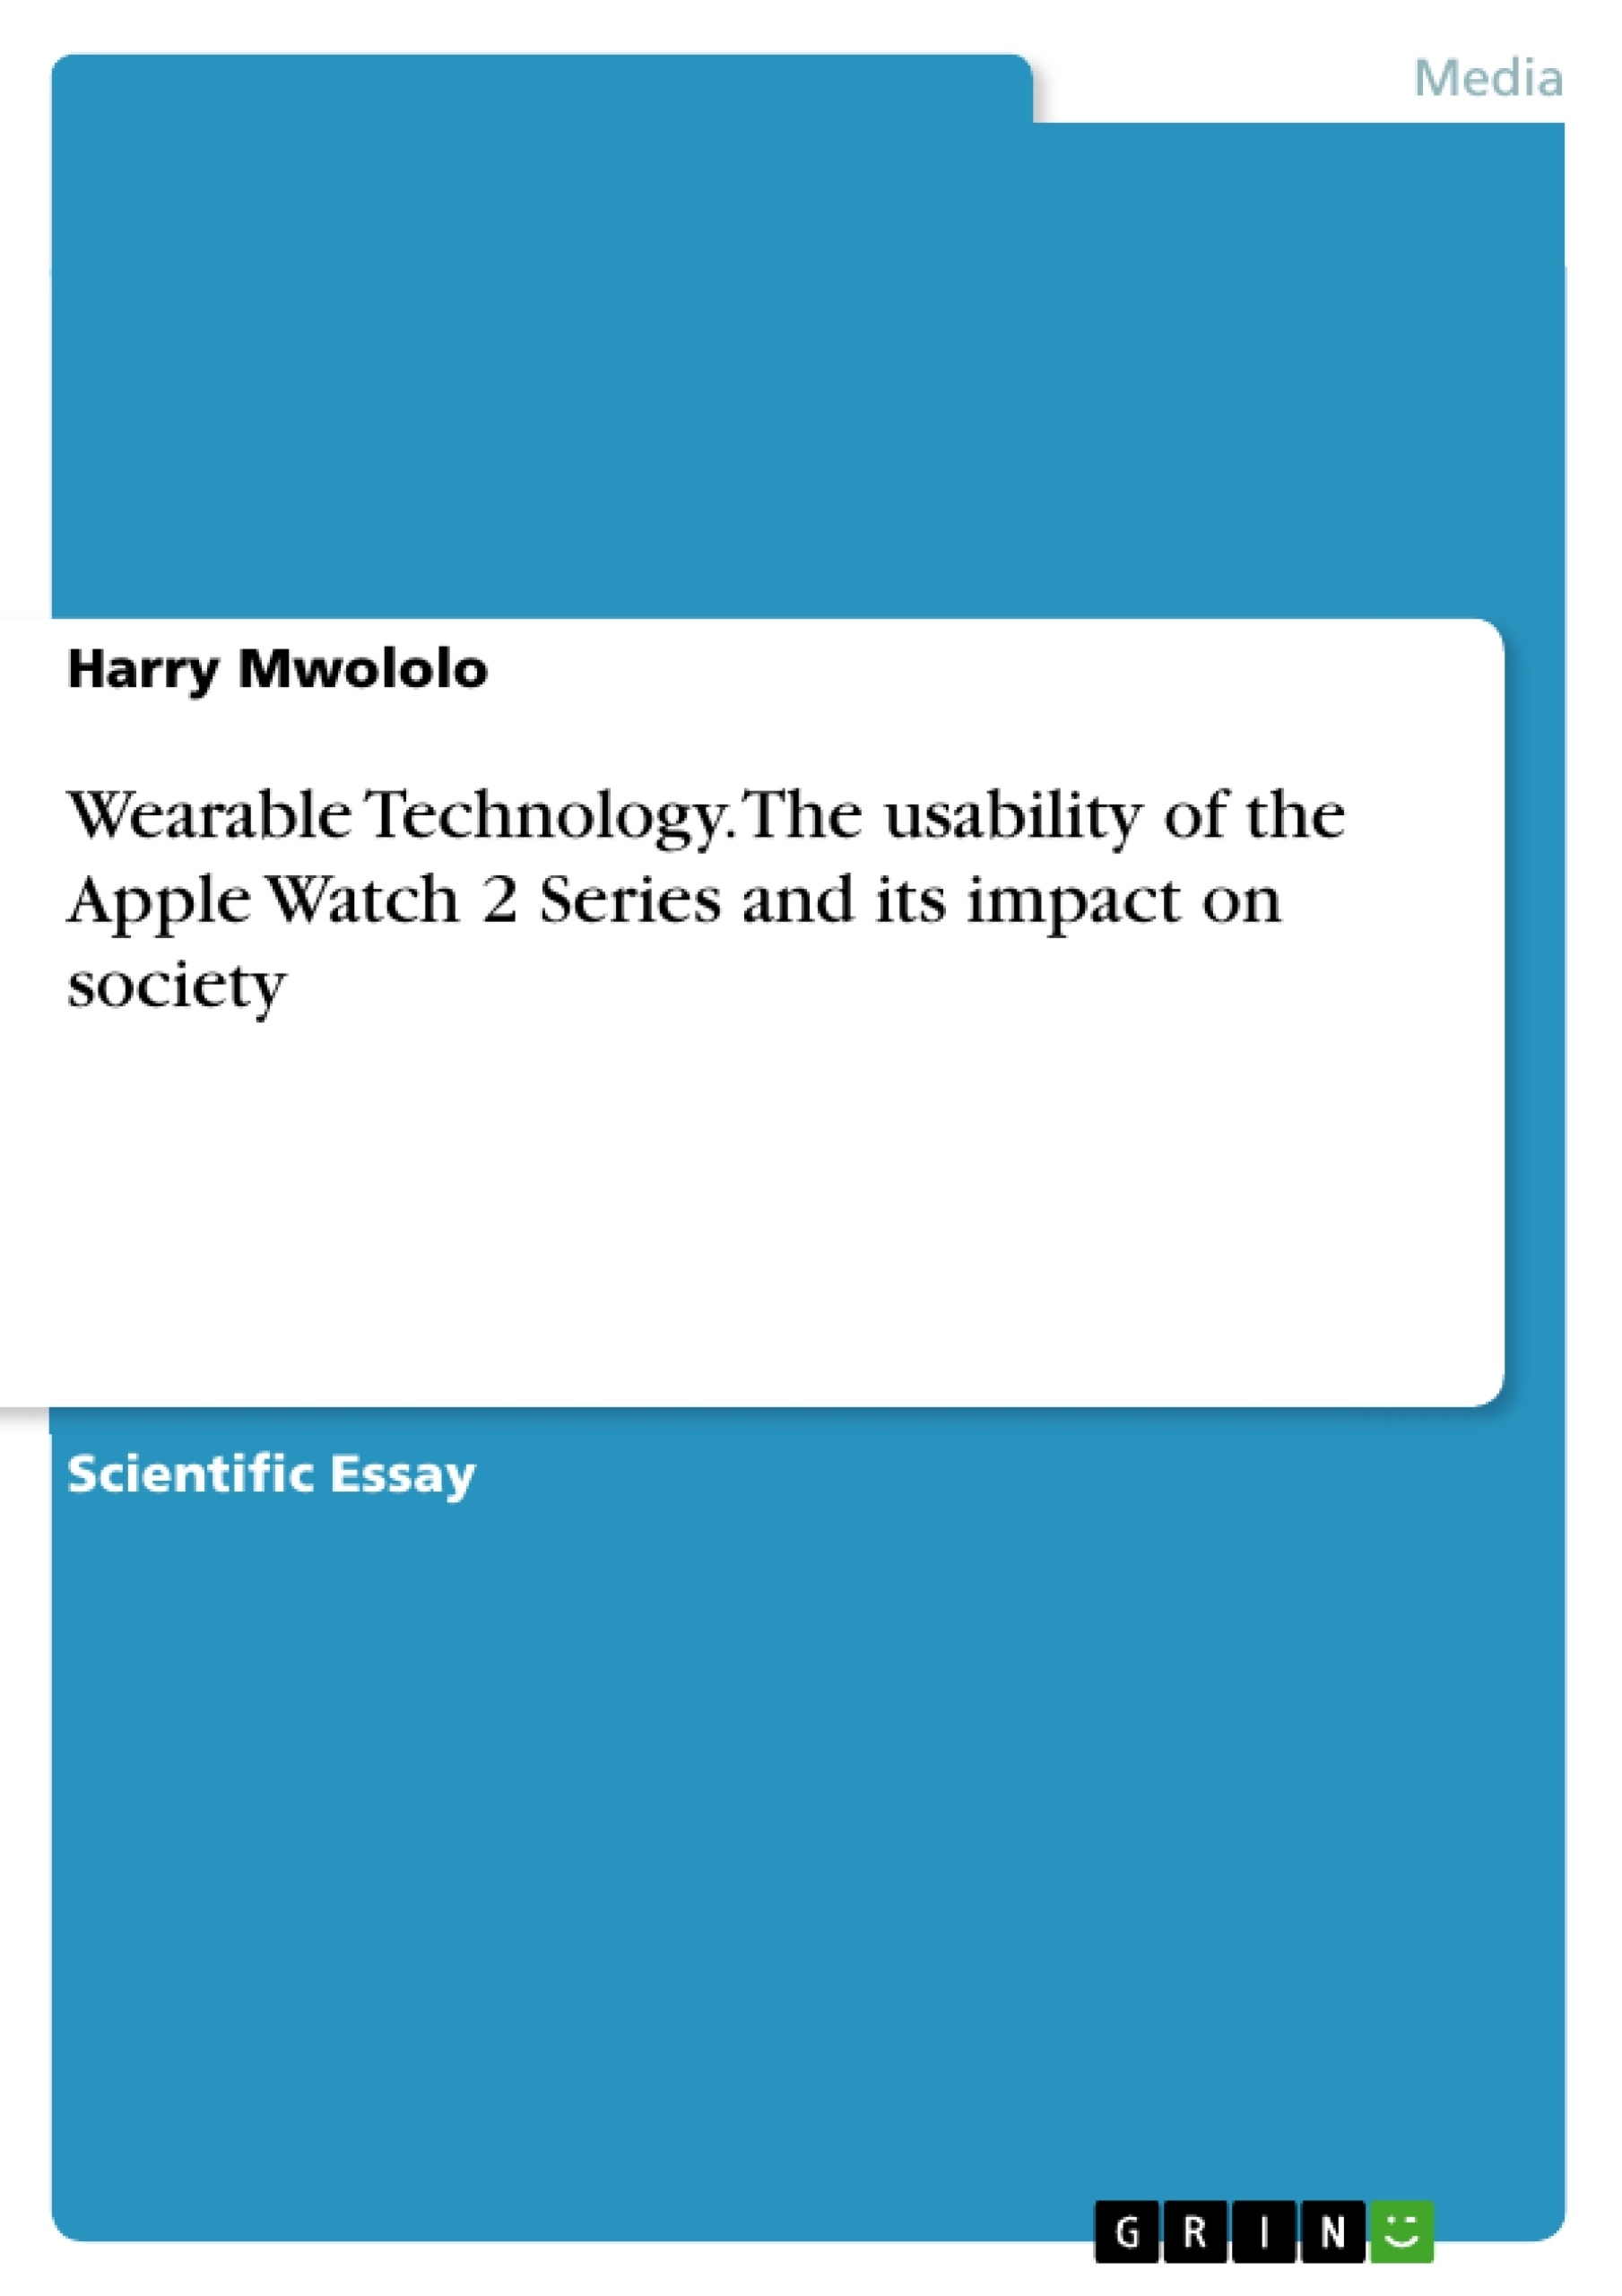 Titre: Wearable Technology.  The usability of the Apple Watch 2 Series and its impact on society